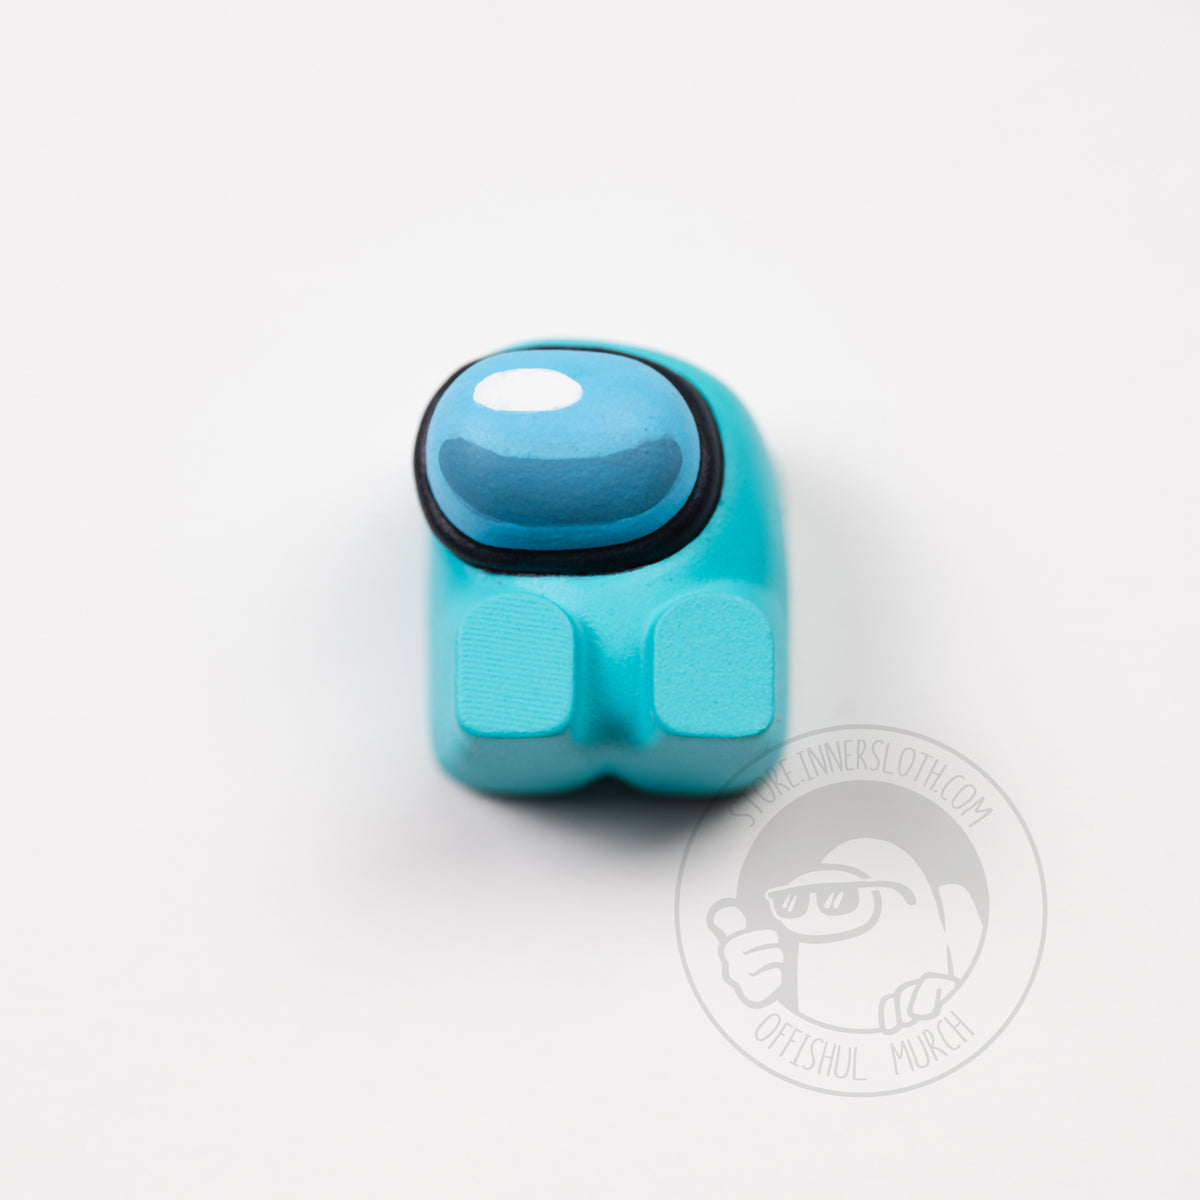 A product photo from above of the cyan keyboard keycap.